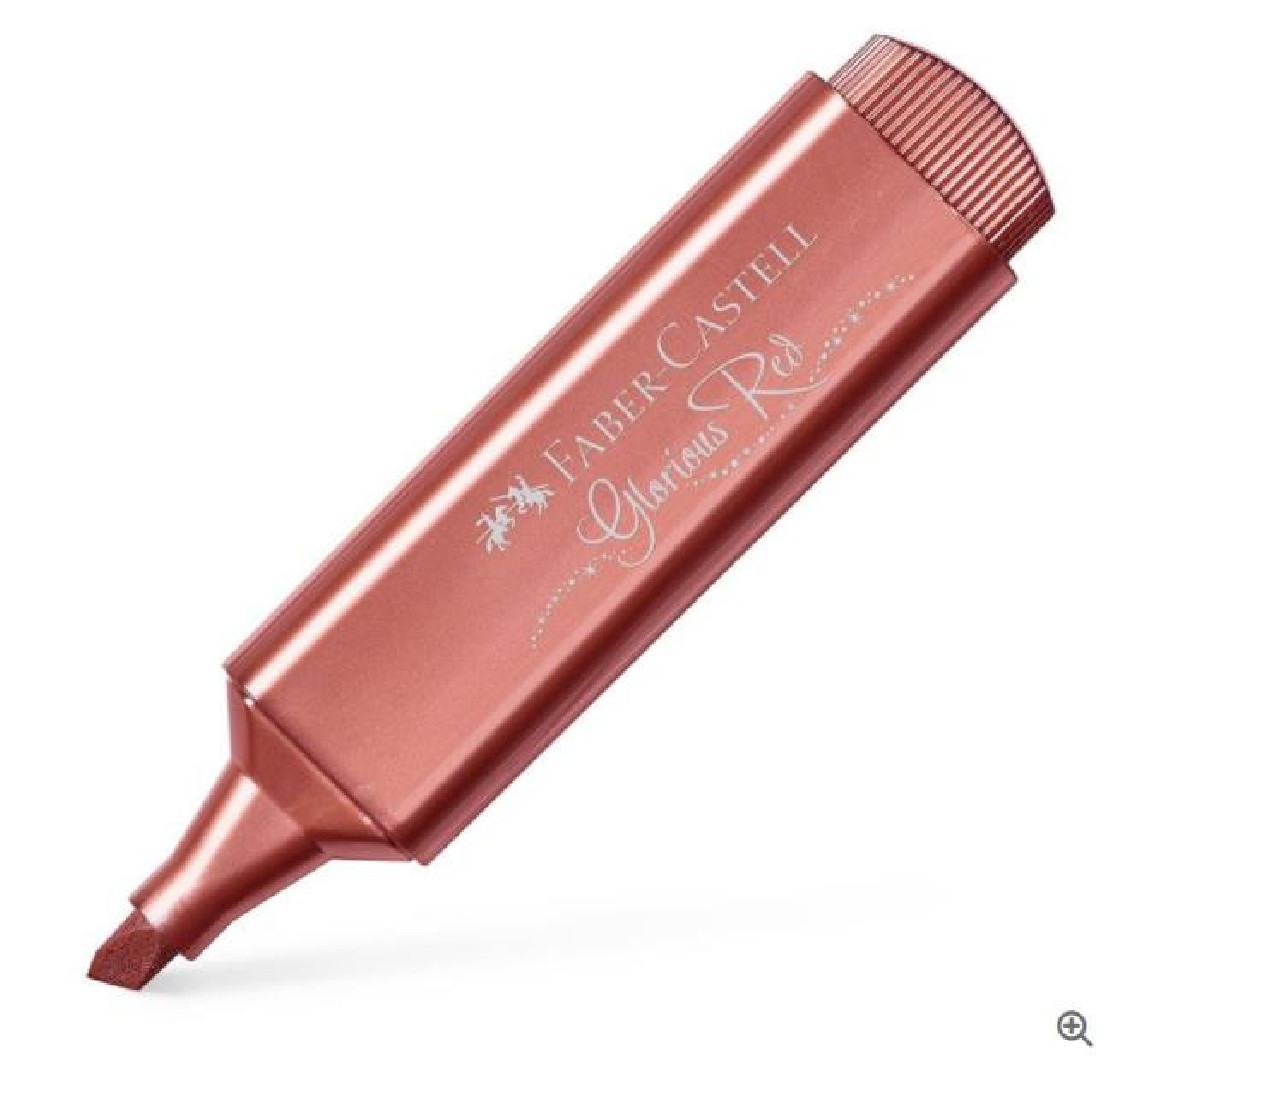 Faber Castell  Highlighter Glorious Red 46 Metallic